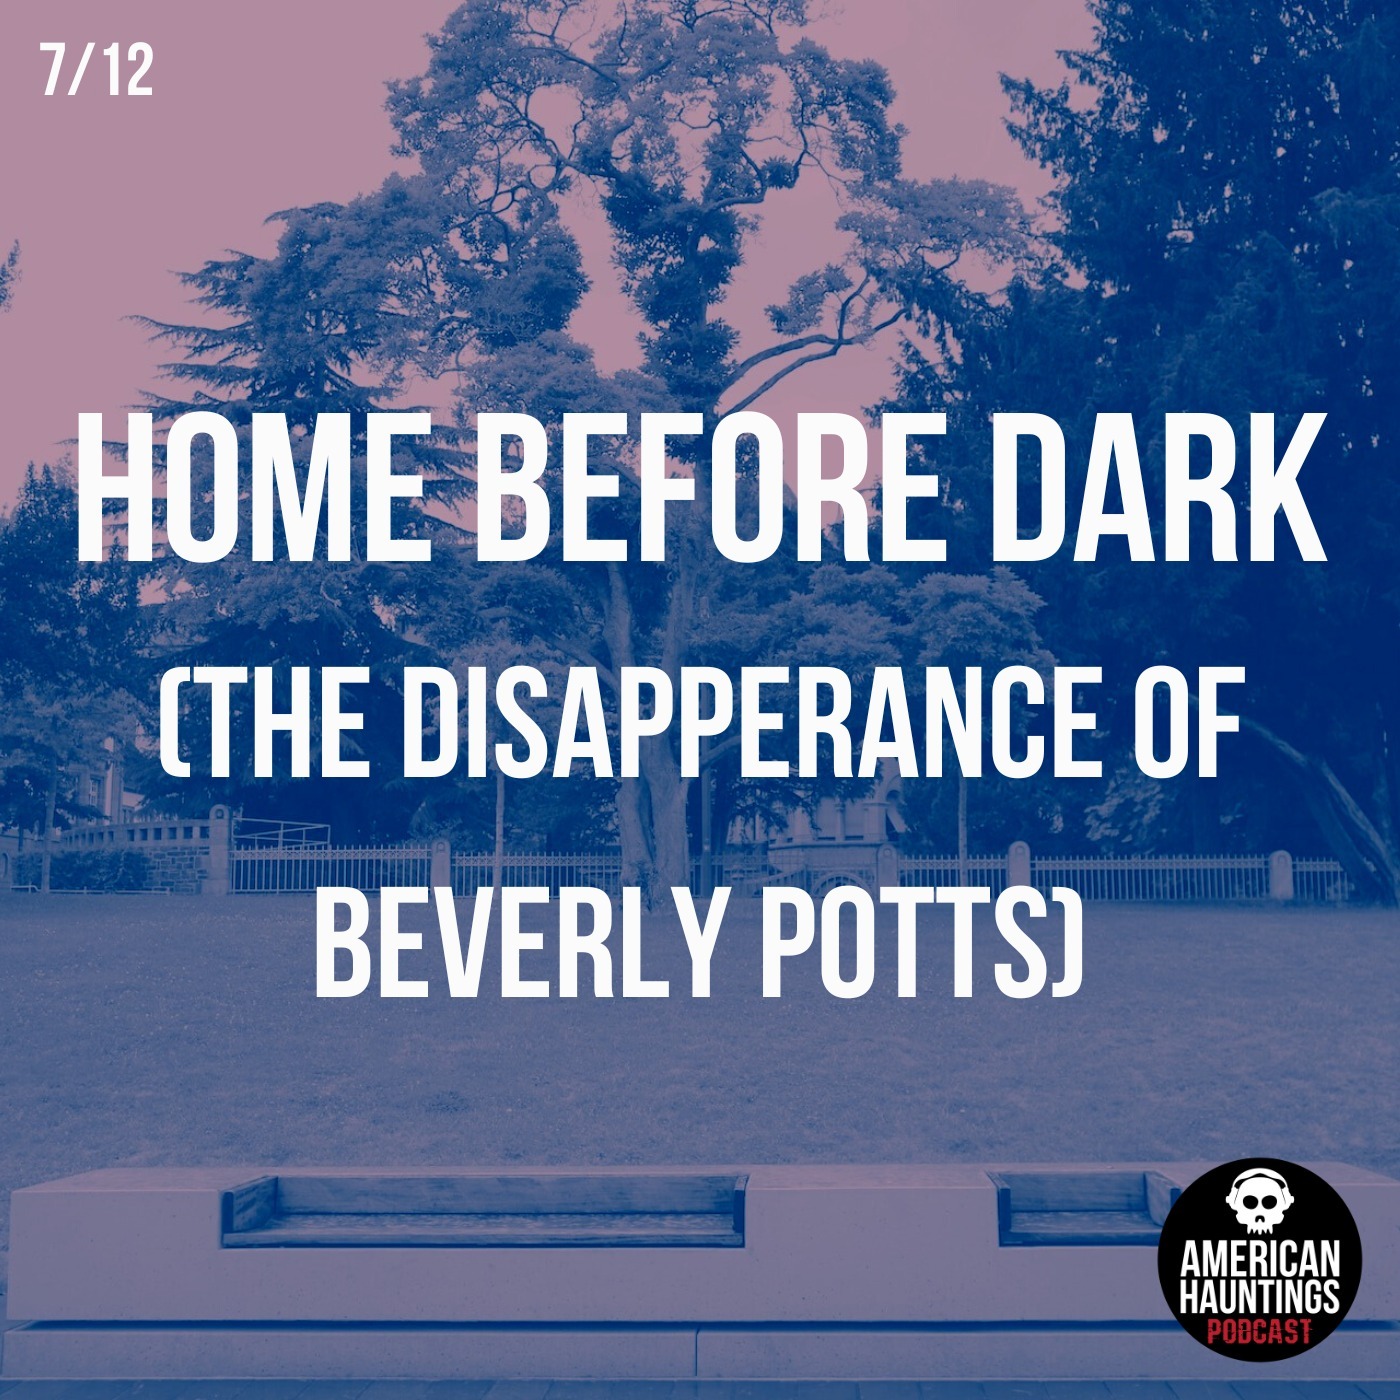 Home Before Dark (The Disappearance of Beverly Potts)